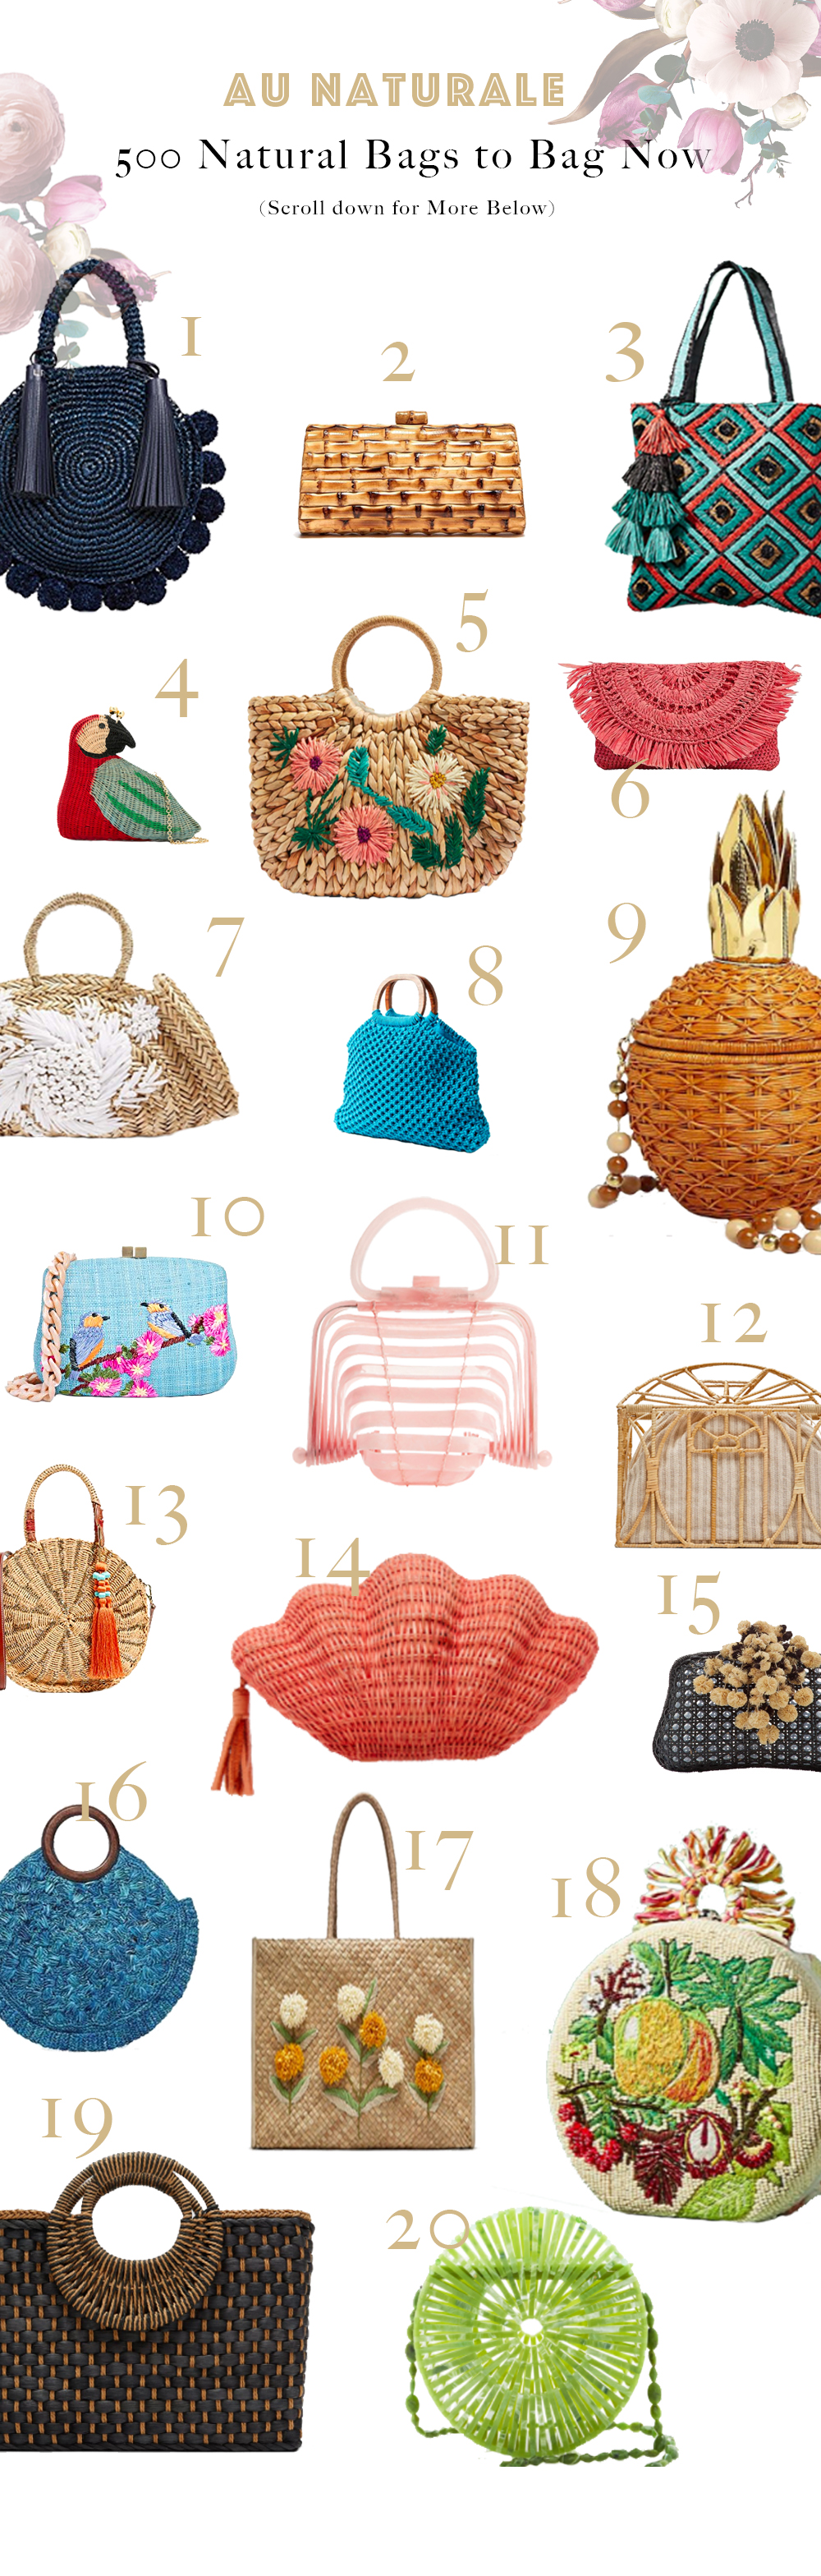 The Shopping List: The 500 Best Natural Bag Roundup